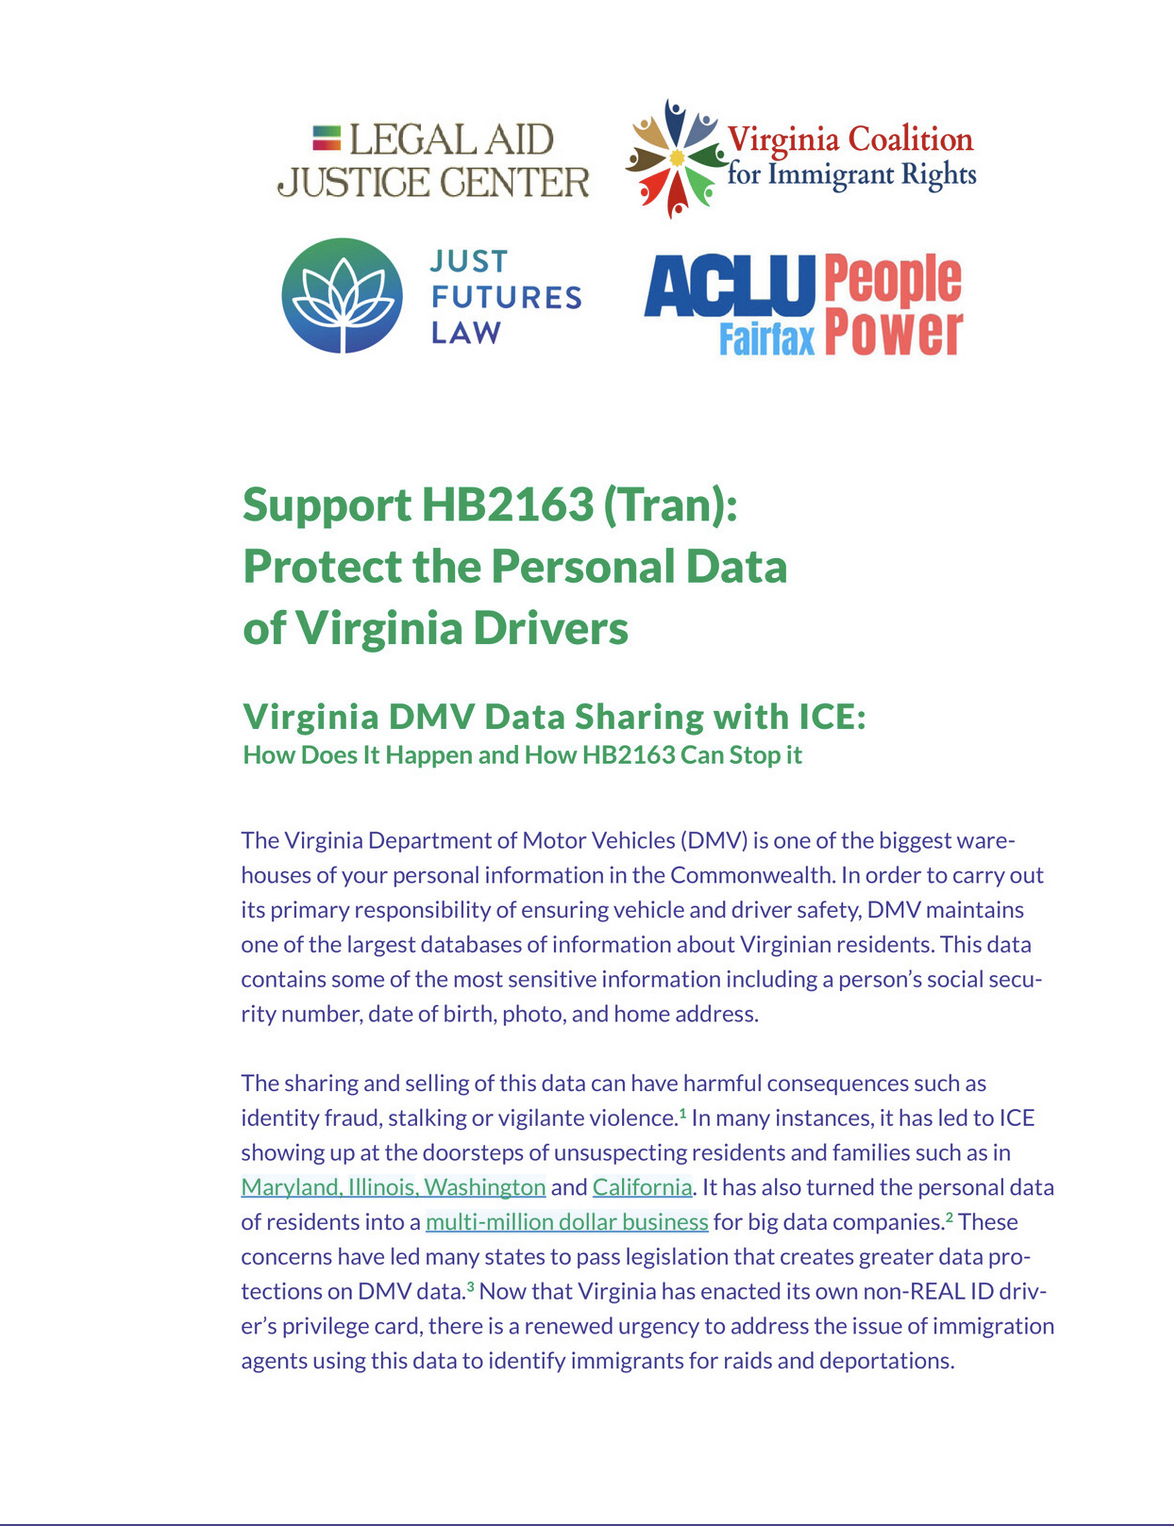 Virginia DMV Data Sharing W/ ICE: How It Happens & How We Can End It